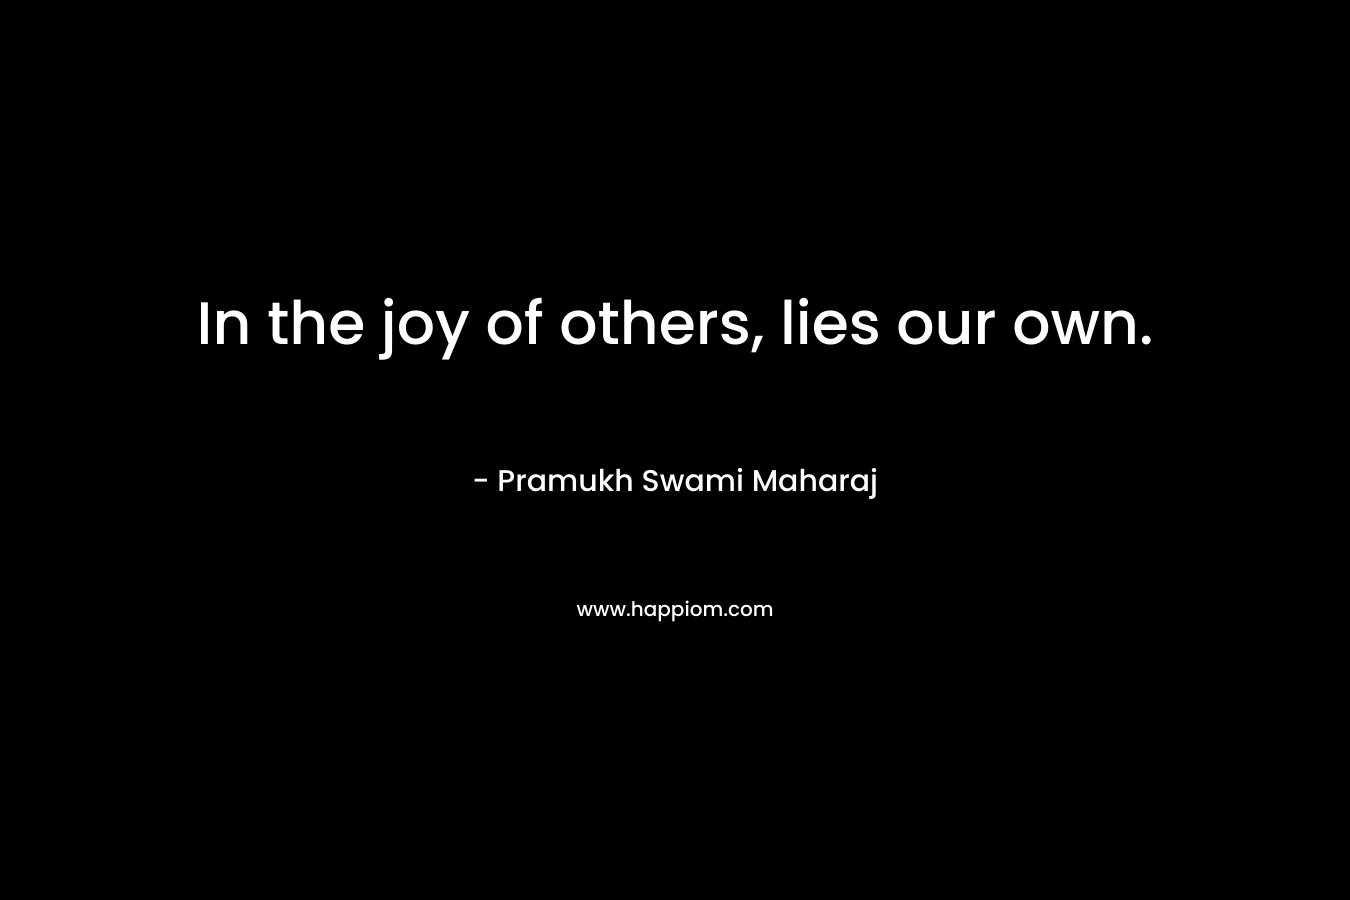 In the joy of others, lies our own.